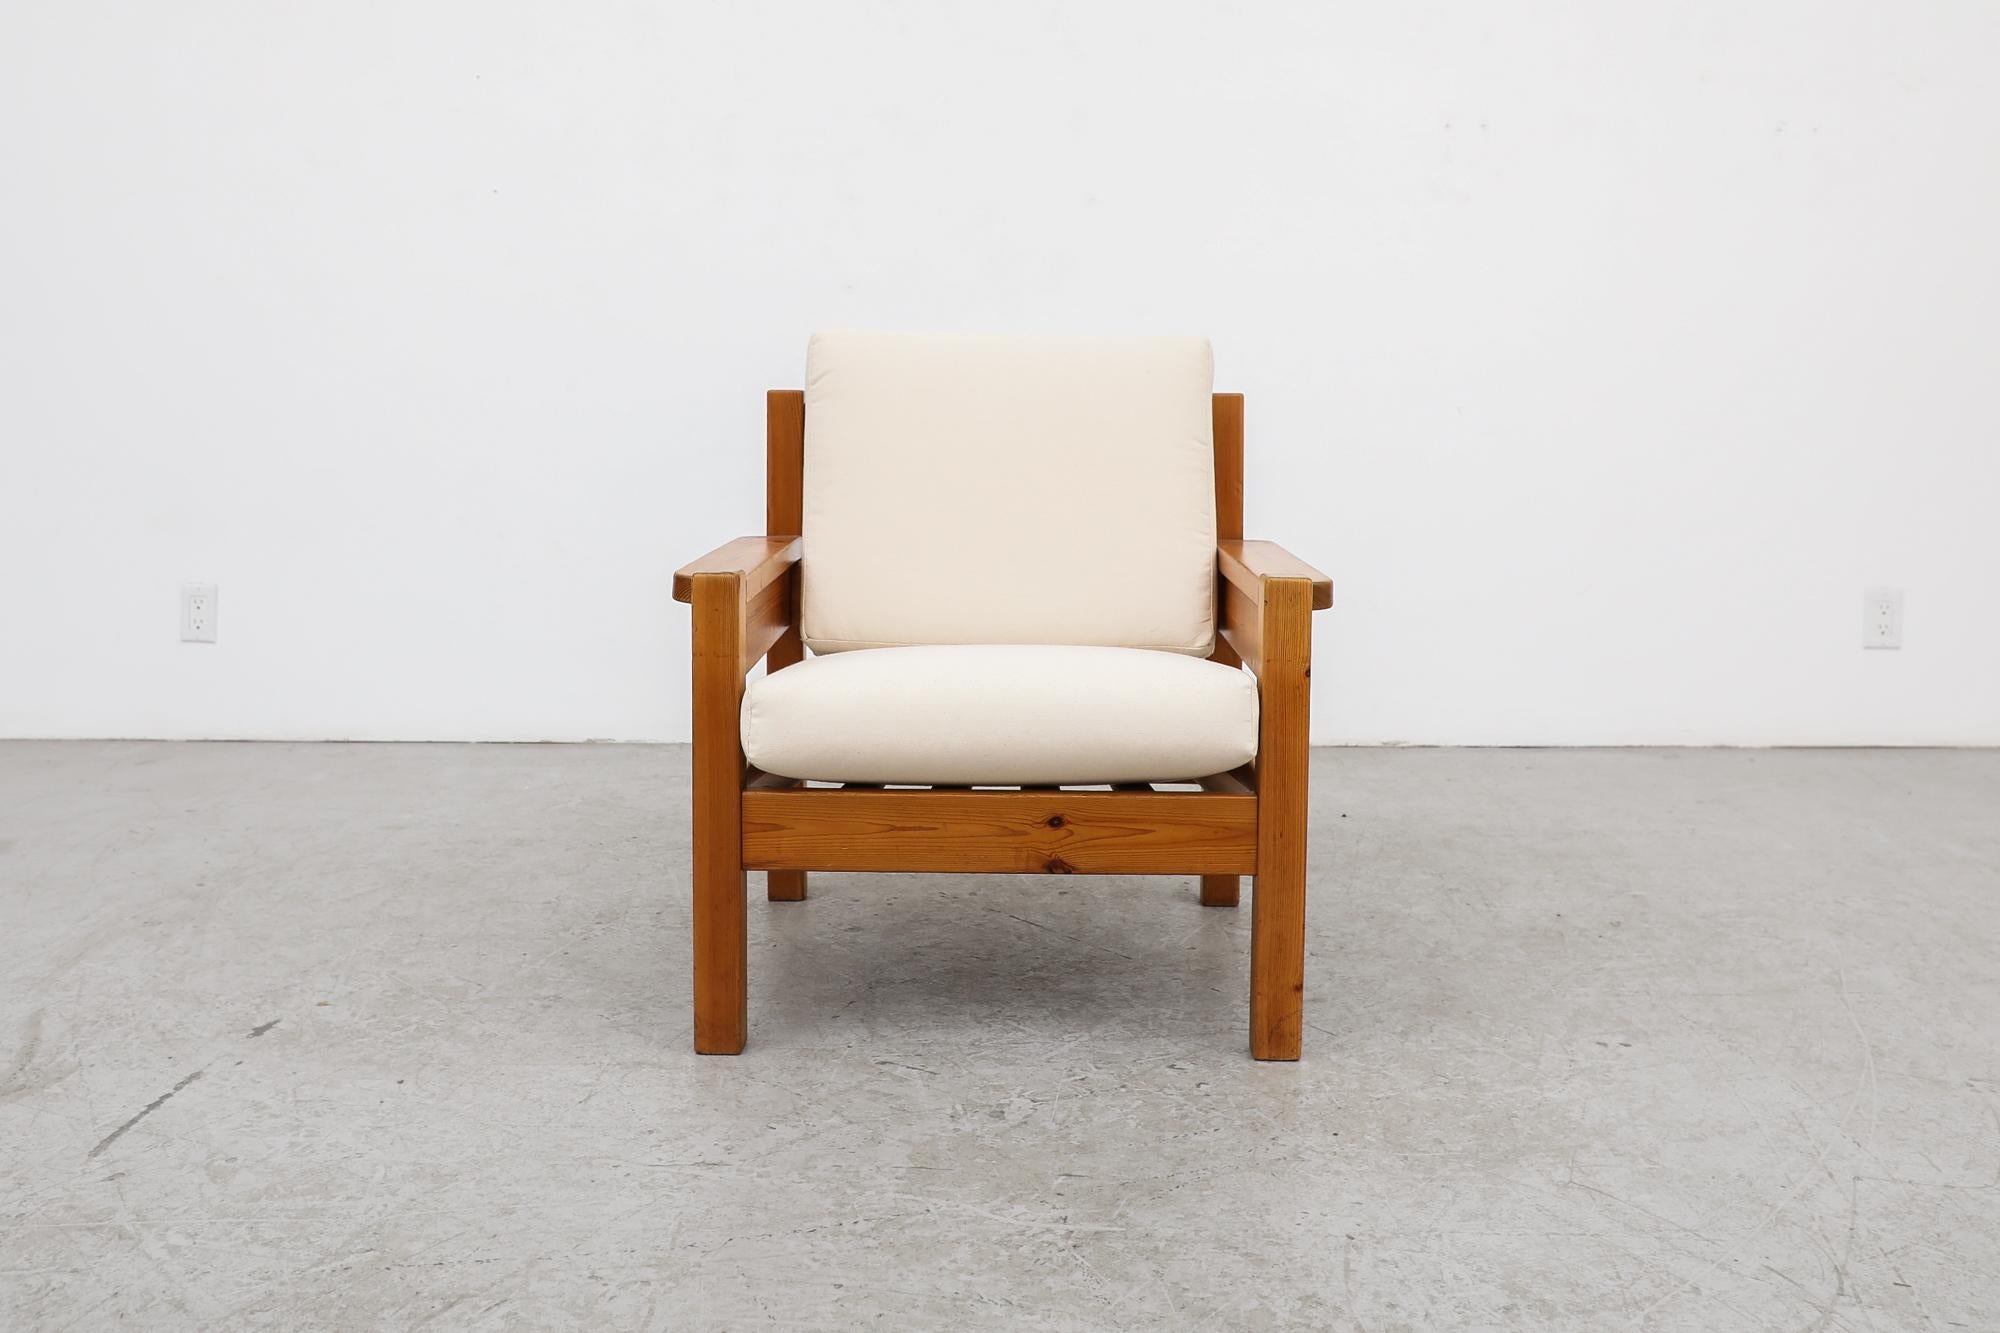 This simple pine crate style lounge chair is inspired by Norwegian designer, Edvin Helseth. The frame is in good original condition, the cushions are newly upholstered in natural canvas. Wear consistent with its age and use.